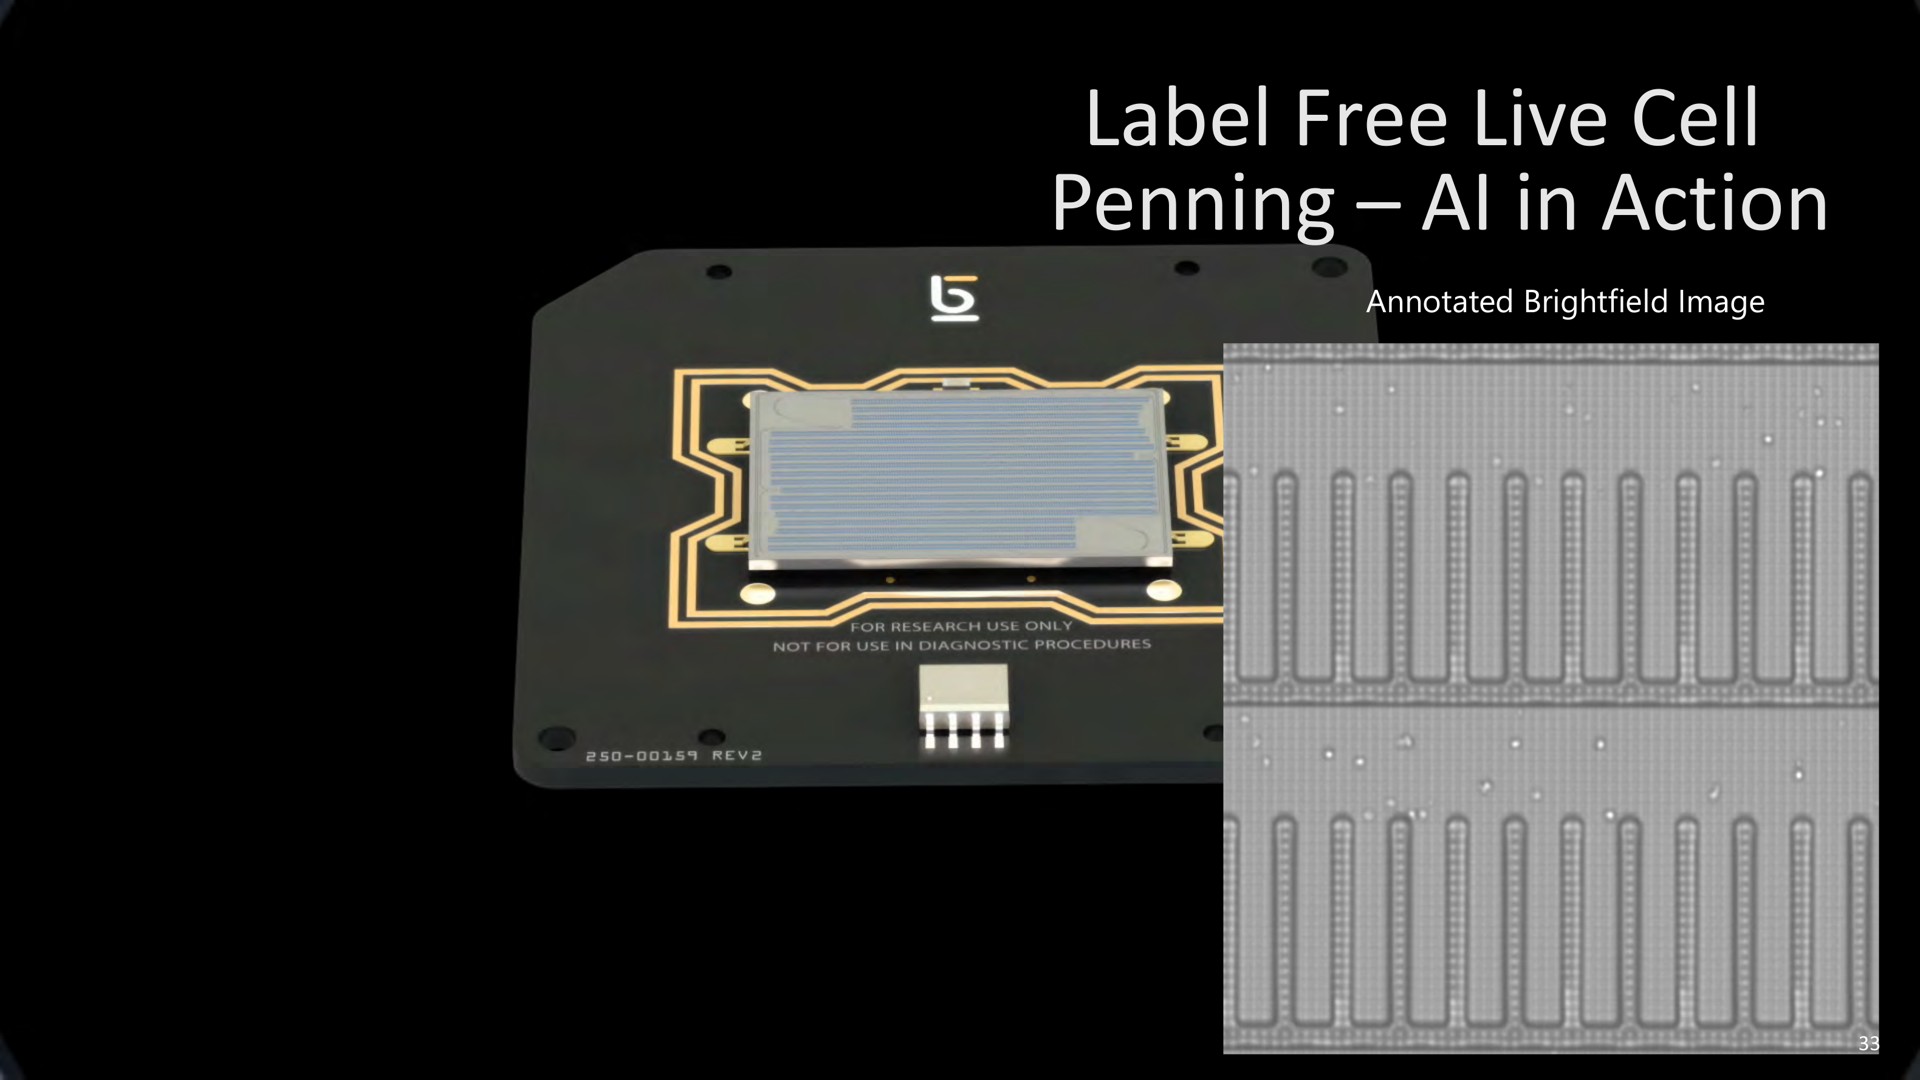 label free live cell penning in action | Berkeley Lights